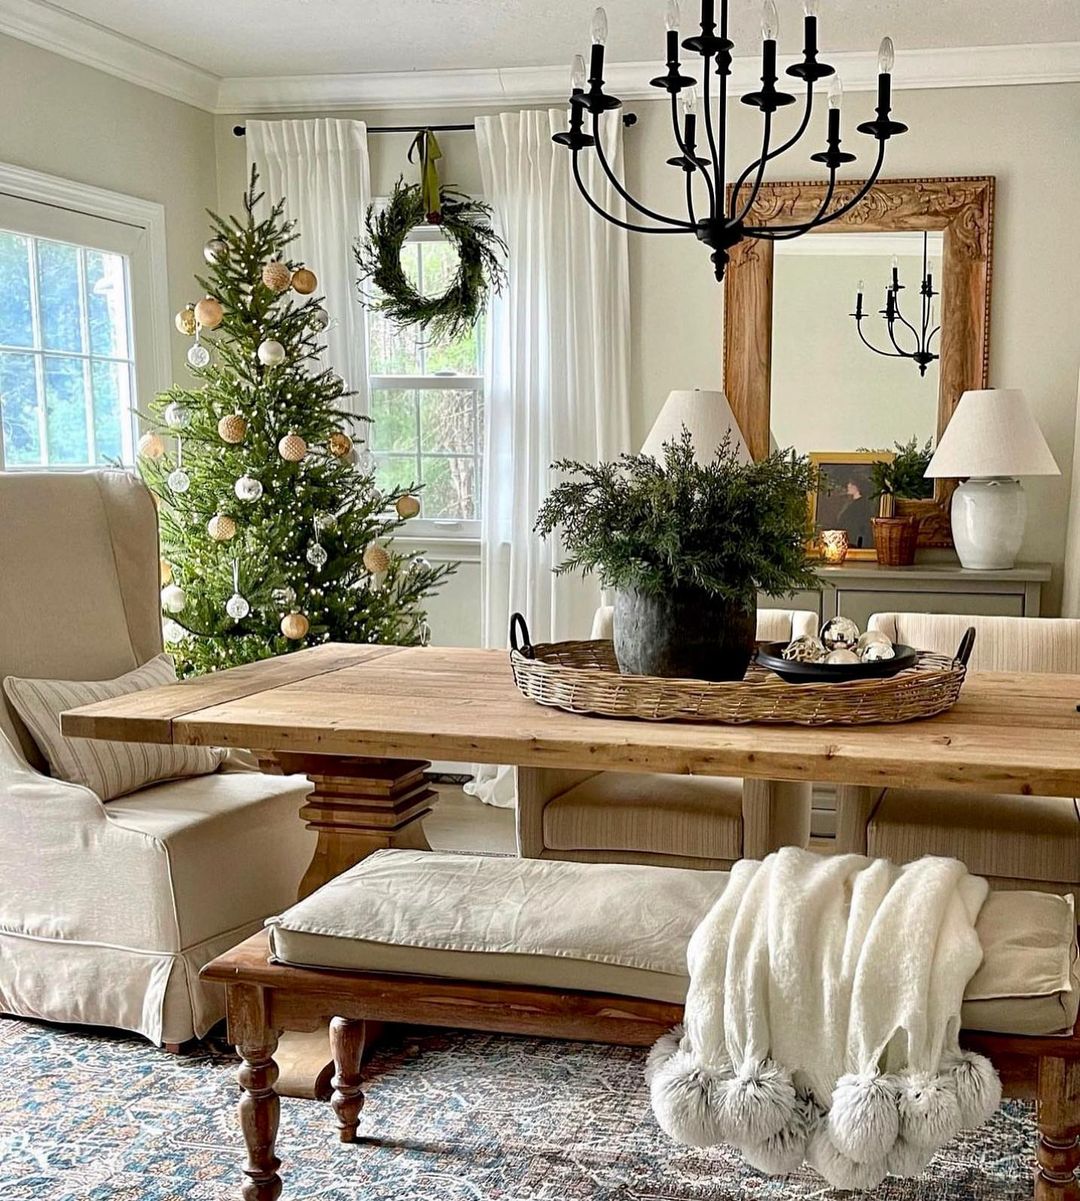 Seasonal Transitions: 5 Tips for Decorating Your Home Throughout the Year